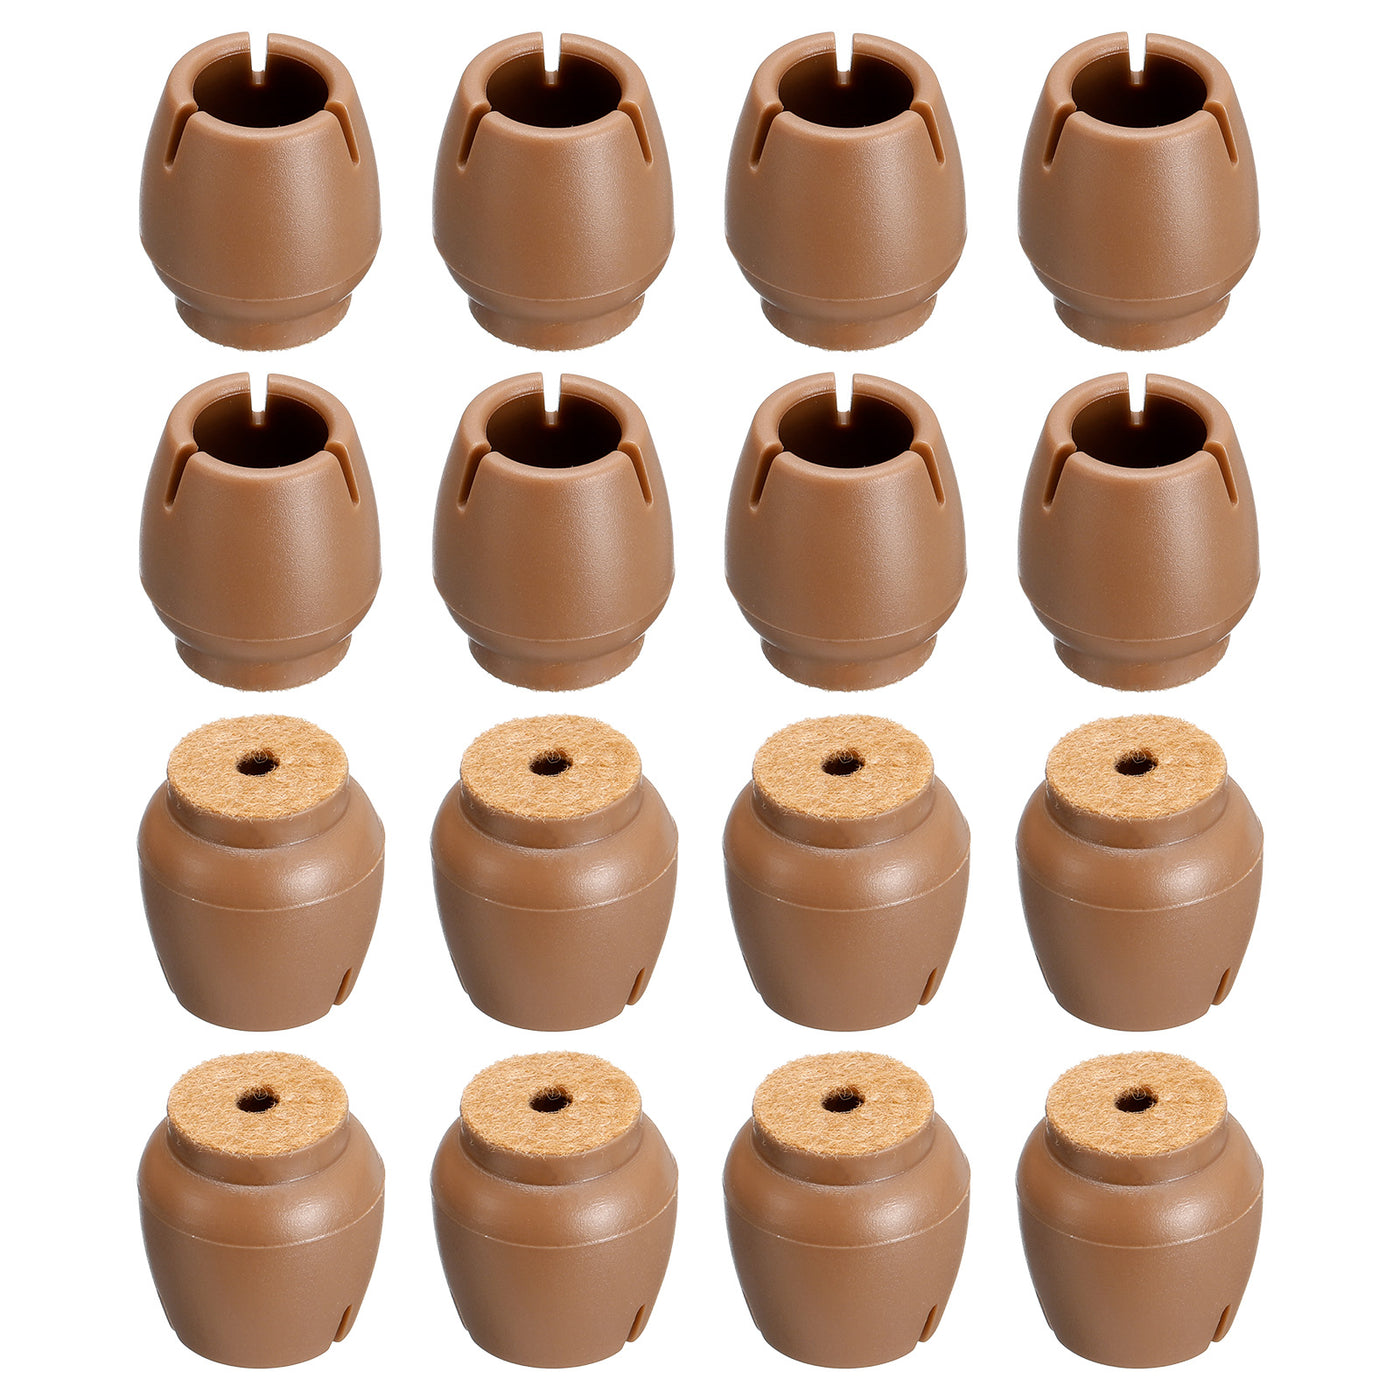 uxcell Uxcell Chair Leg Floor Protectors, 16Pcs 13mm(0.51") Silicone & Felt Chair Leg Cover Caps for Hardwood Floors (Coffee)